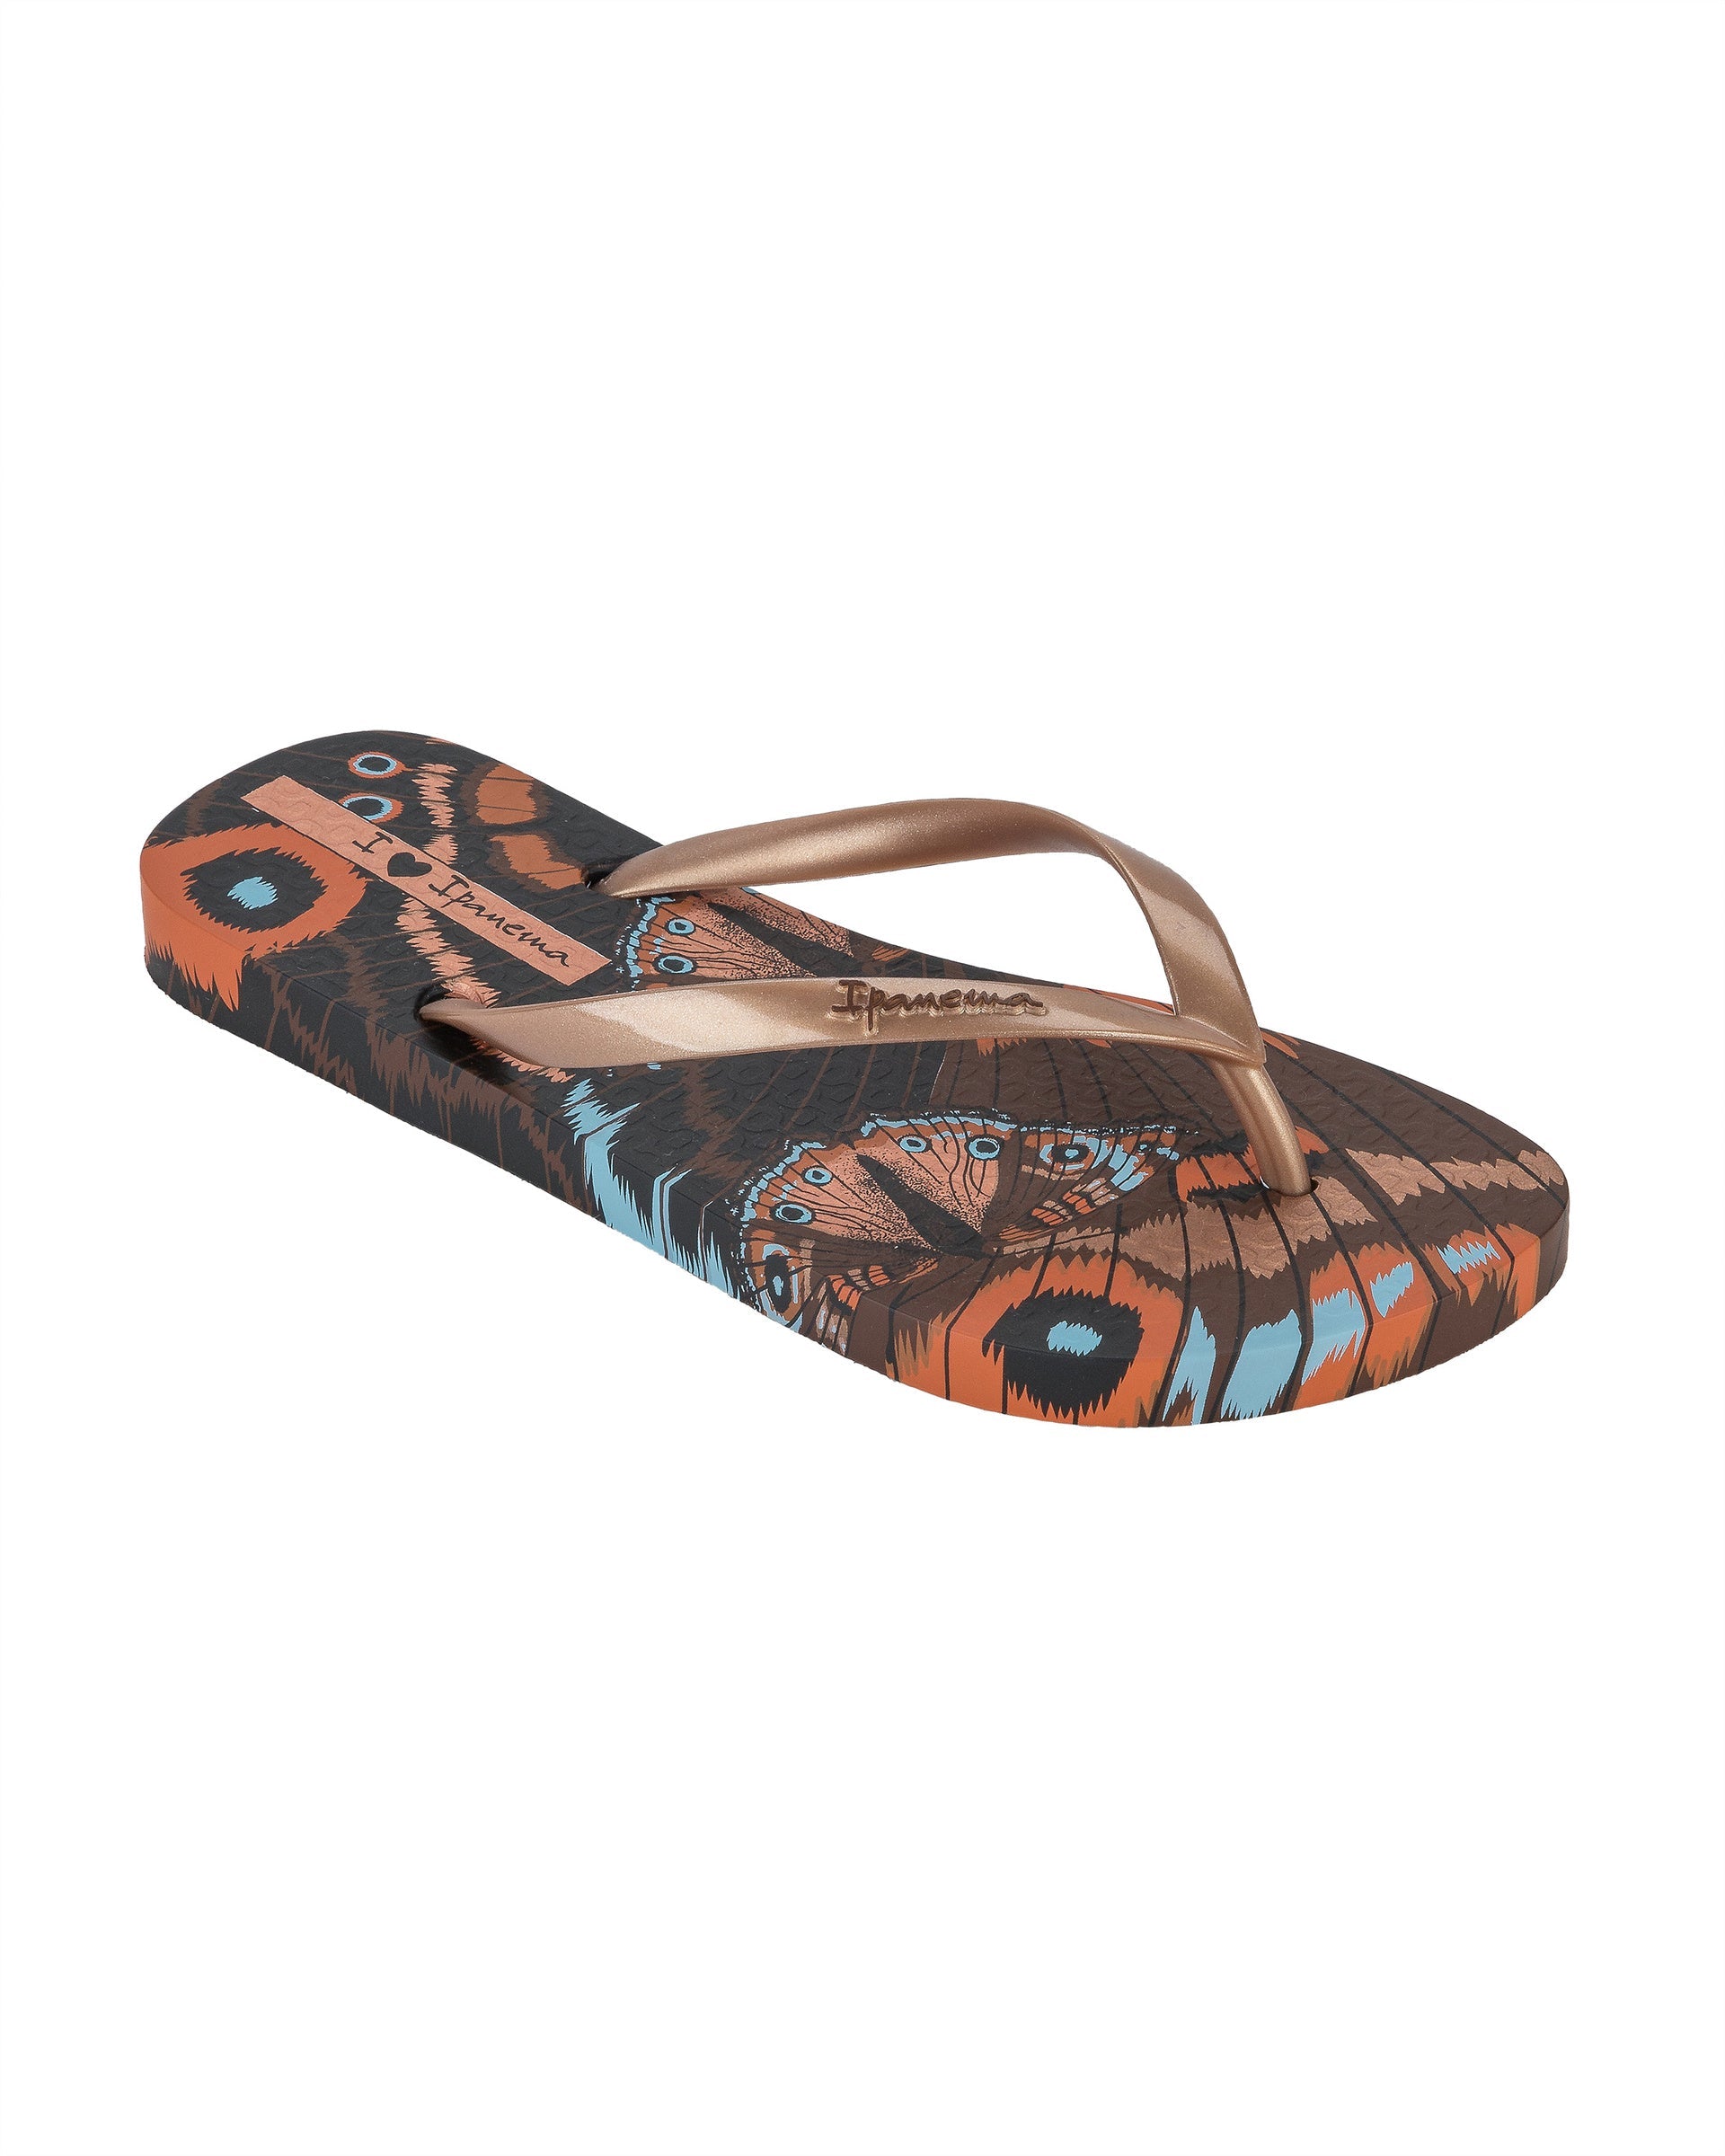 Angled view of a brown Ipanema Animal Print women's flip flop with glitter pink straps and butterfly sole print.